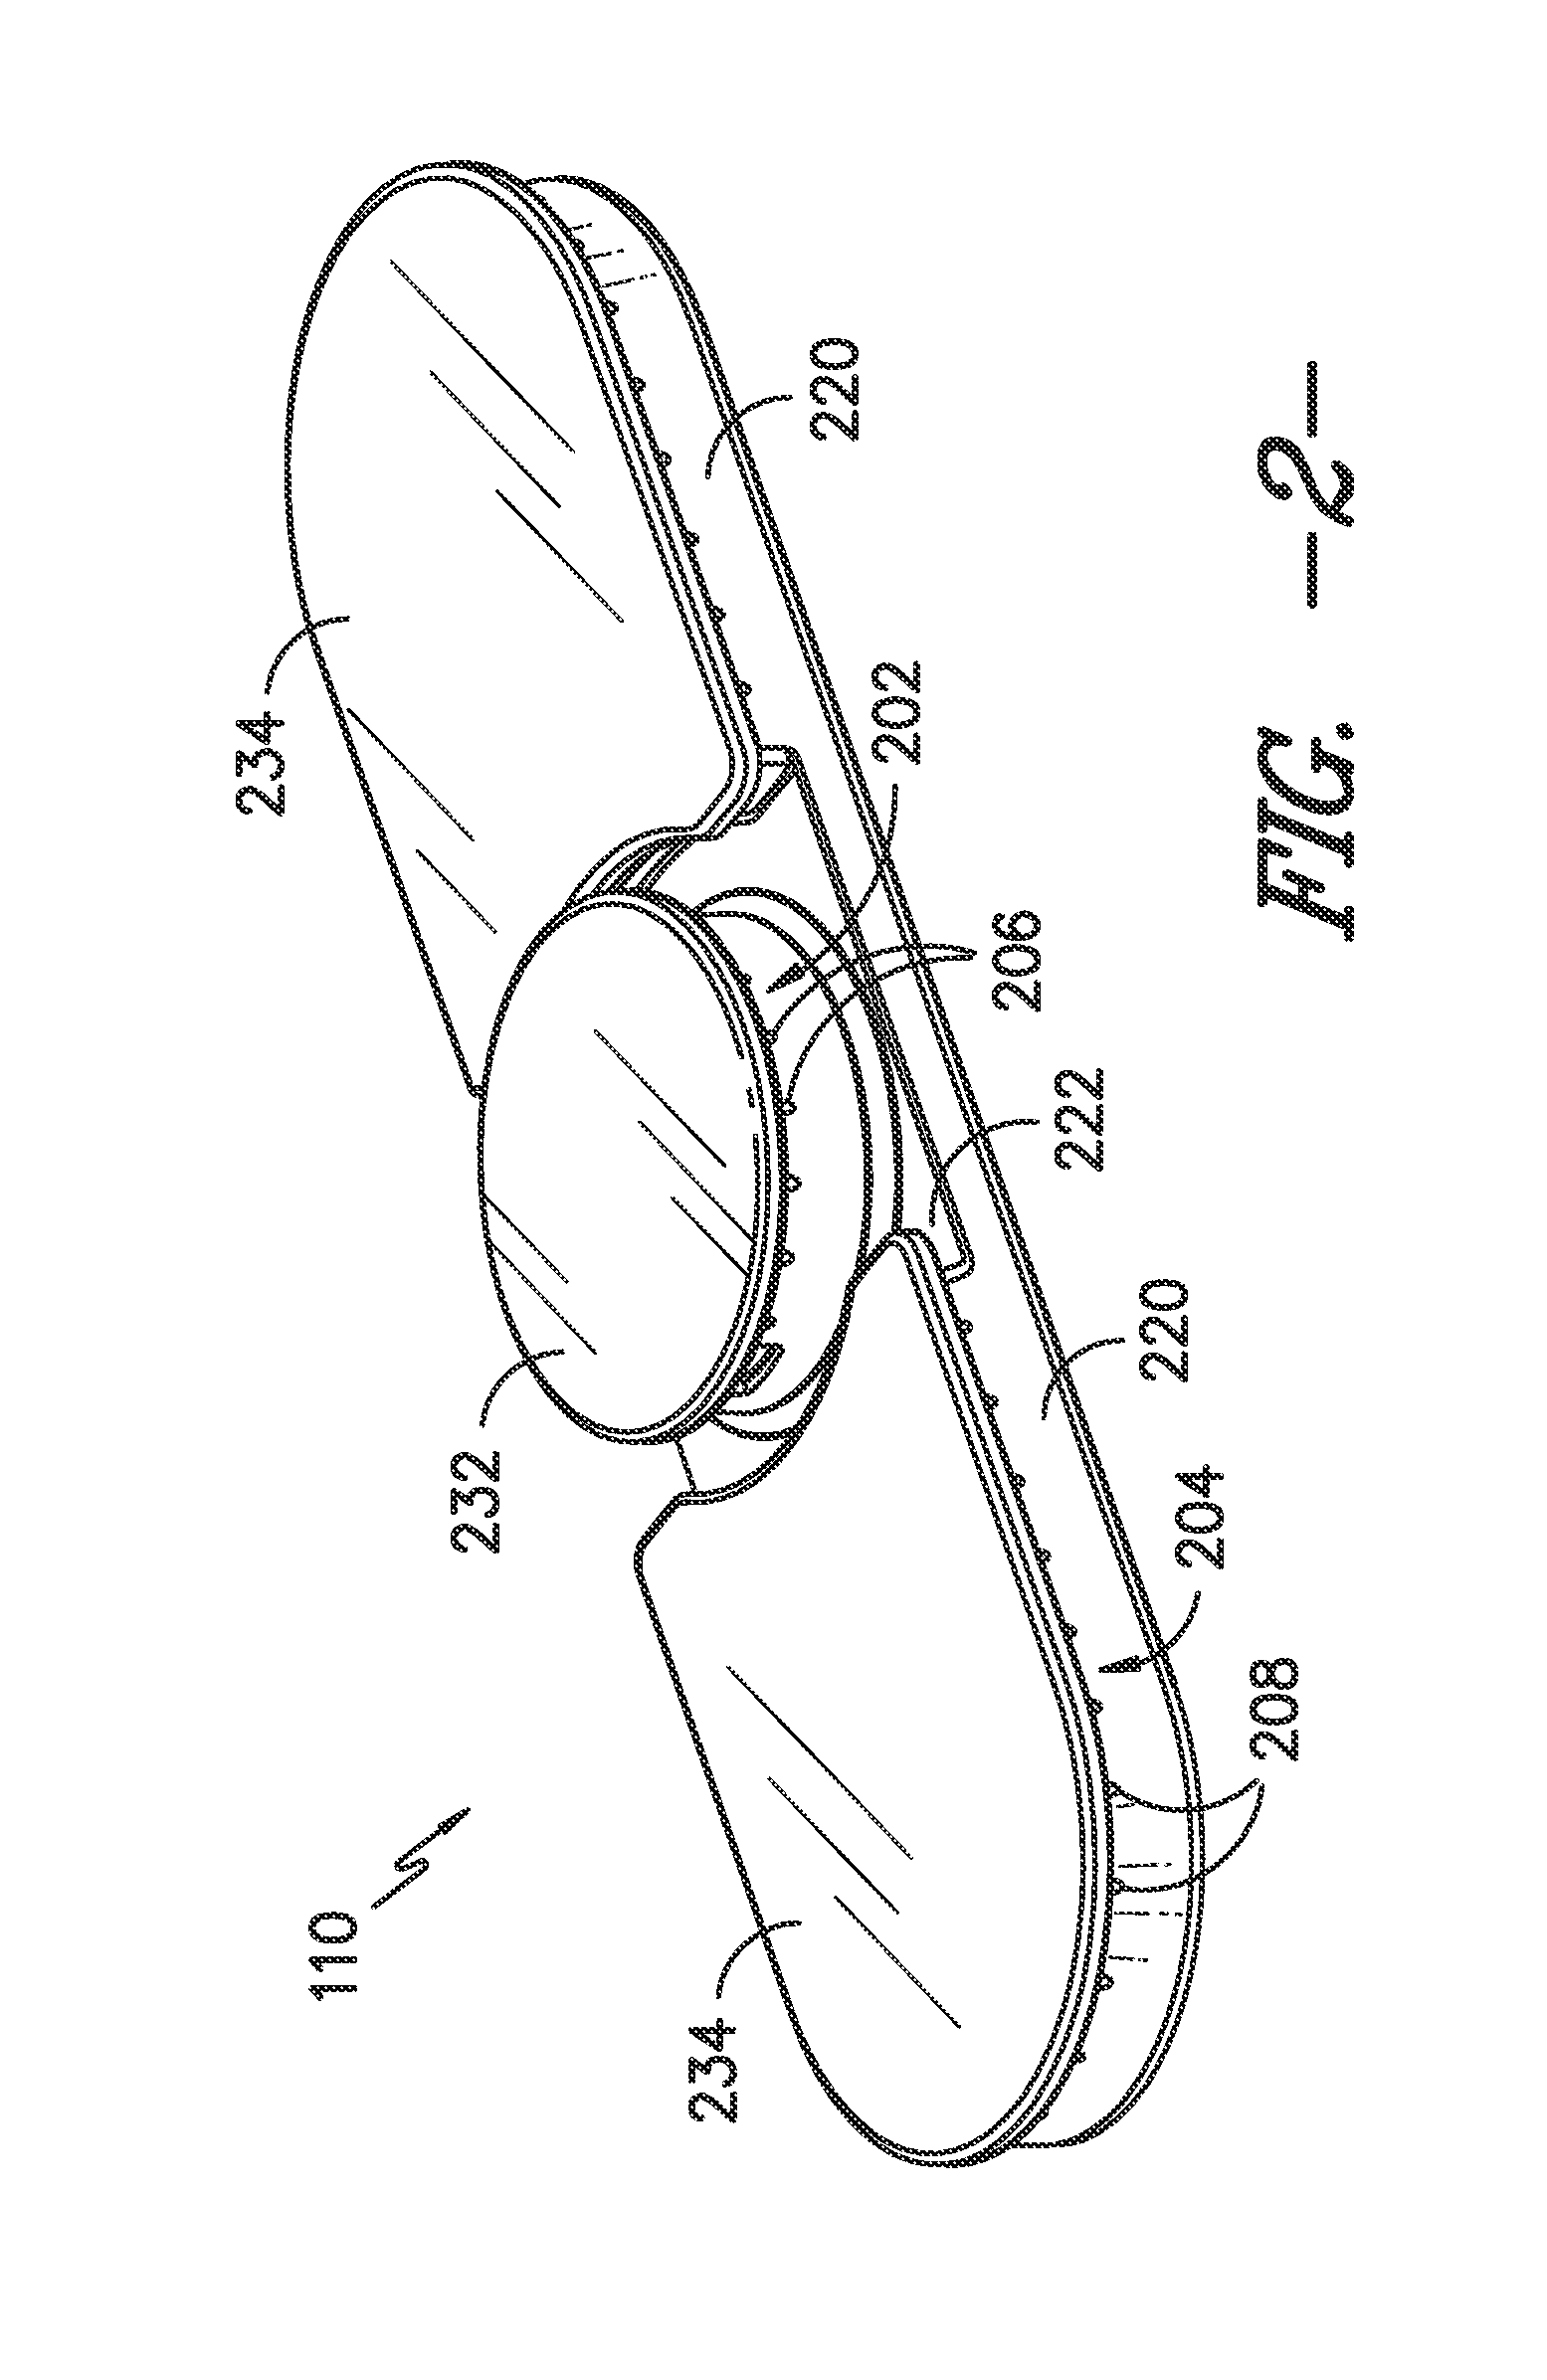 Burner assembly for cooktop appliance and method for operating same